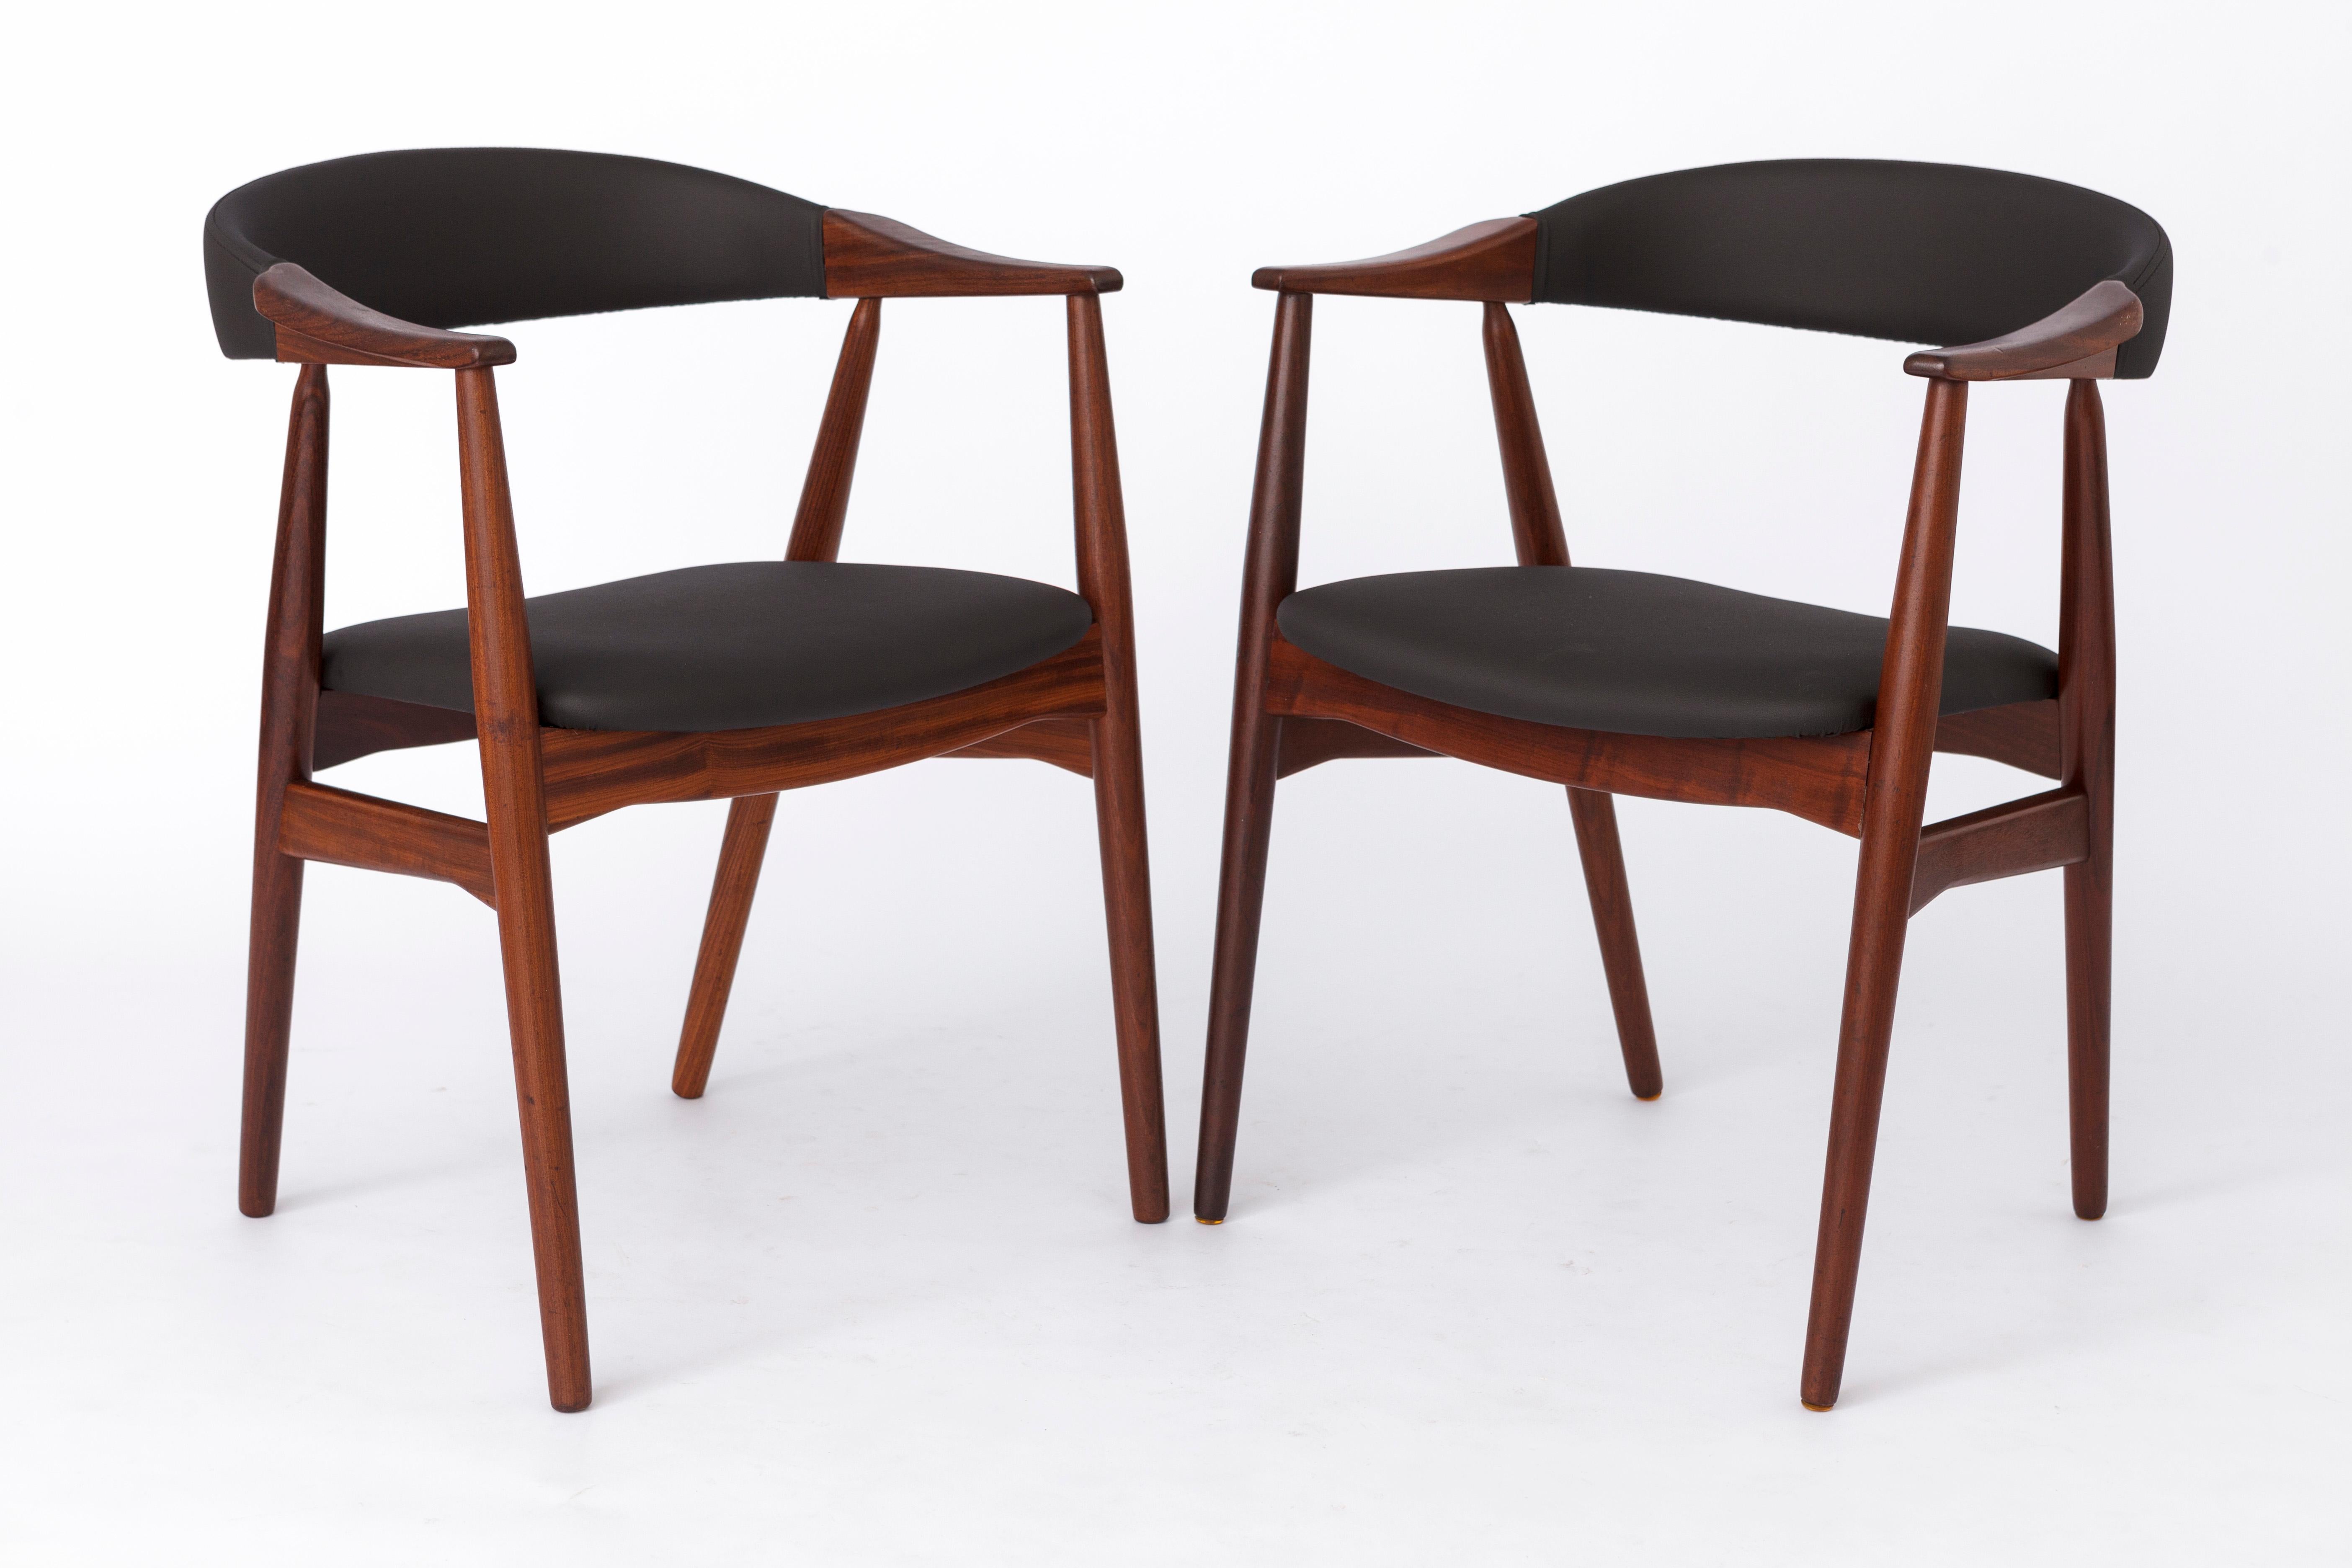 2 Armchairs by Danish designer Th. Harlev for manufacturer Farstrup Møbelfabrik. 
Model 213 designed first time in 1958. 
Production period approx 1950s-1960s. 
Displayed price is for a pair. 

Good condition. Sturdy teak frame. Stable stand.